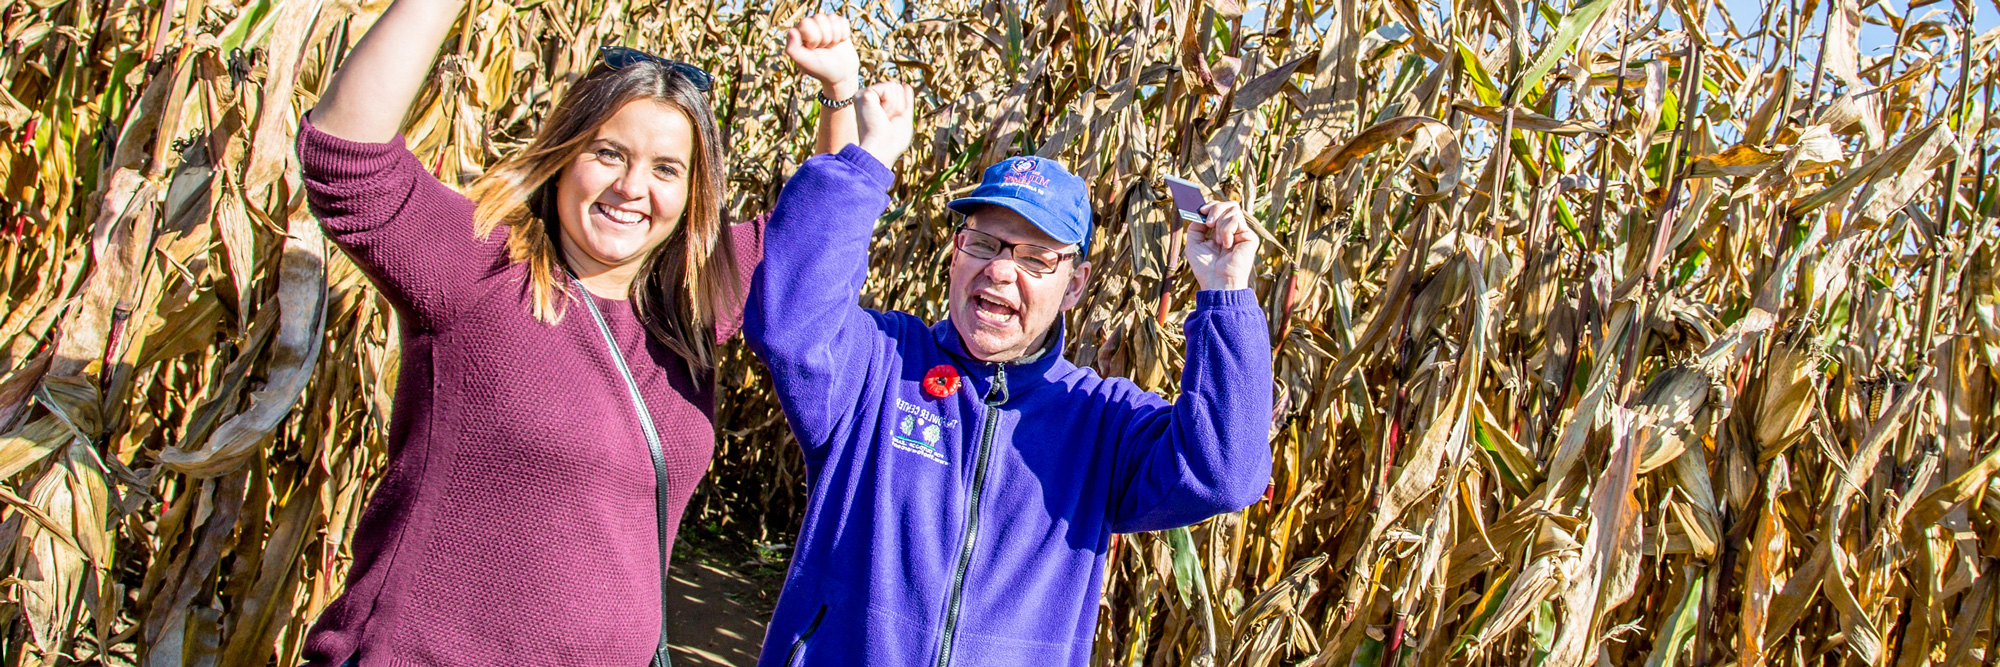 A man and a woman standing in a cornfield with hands raised in celebration